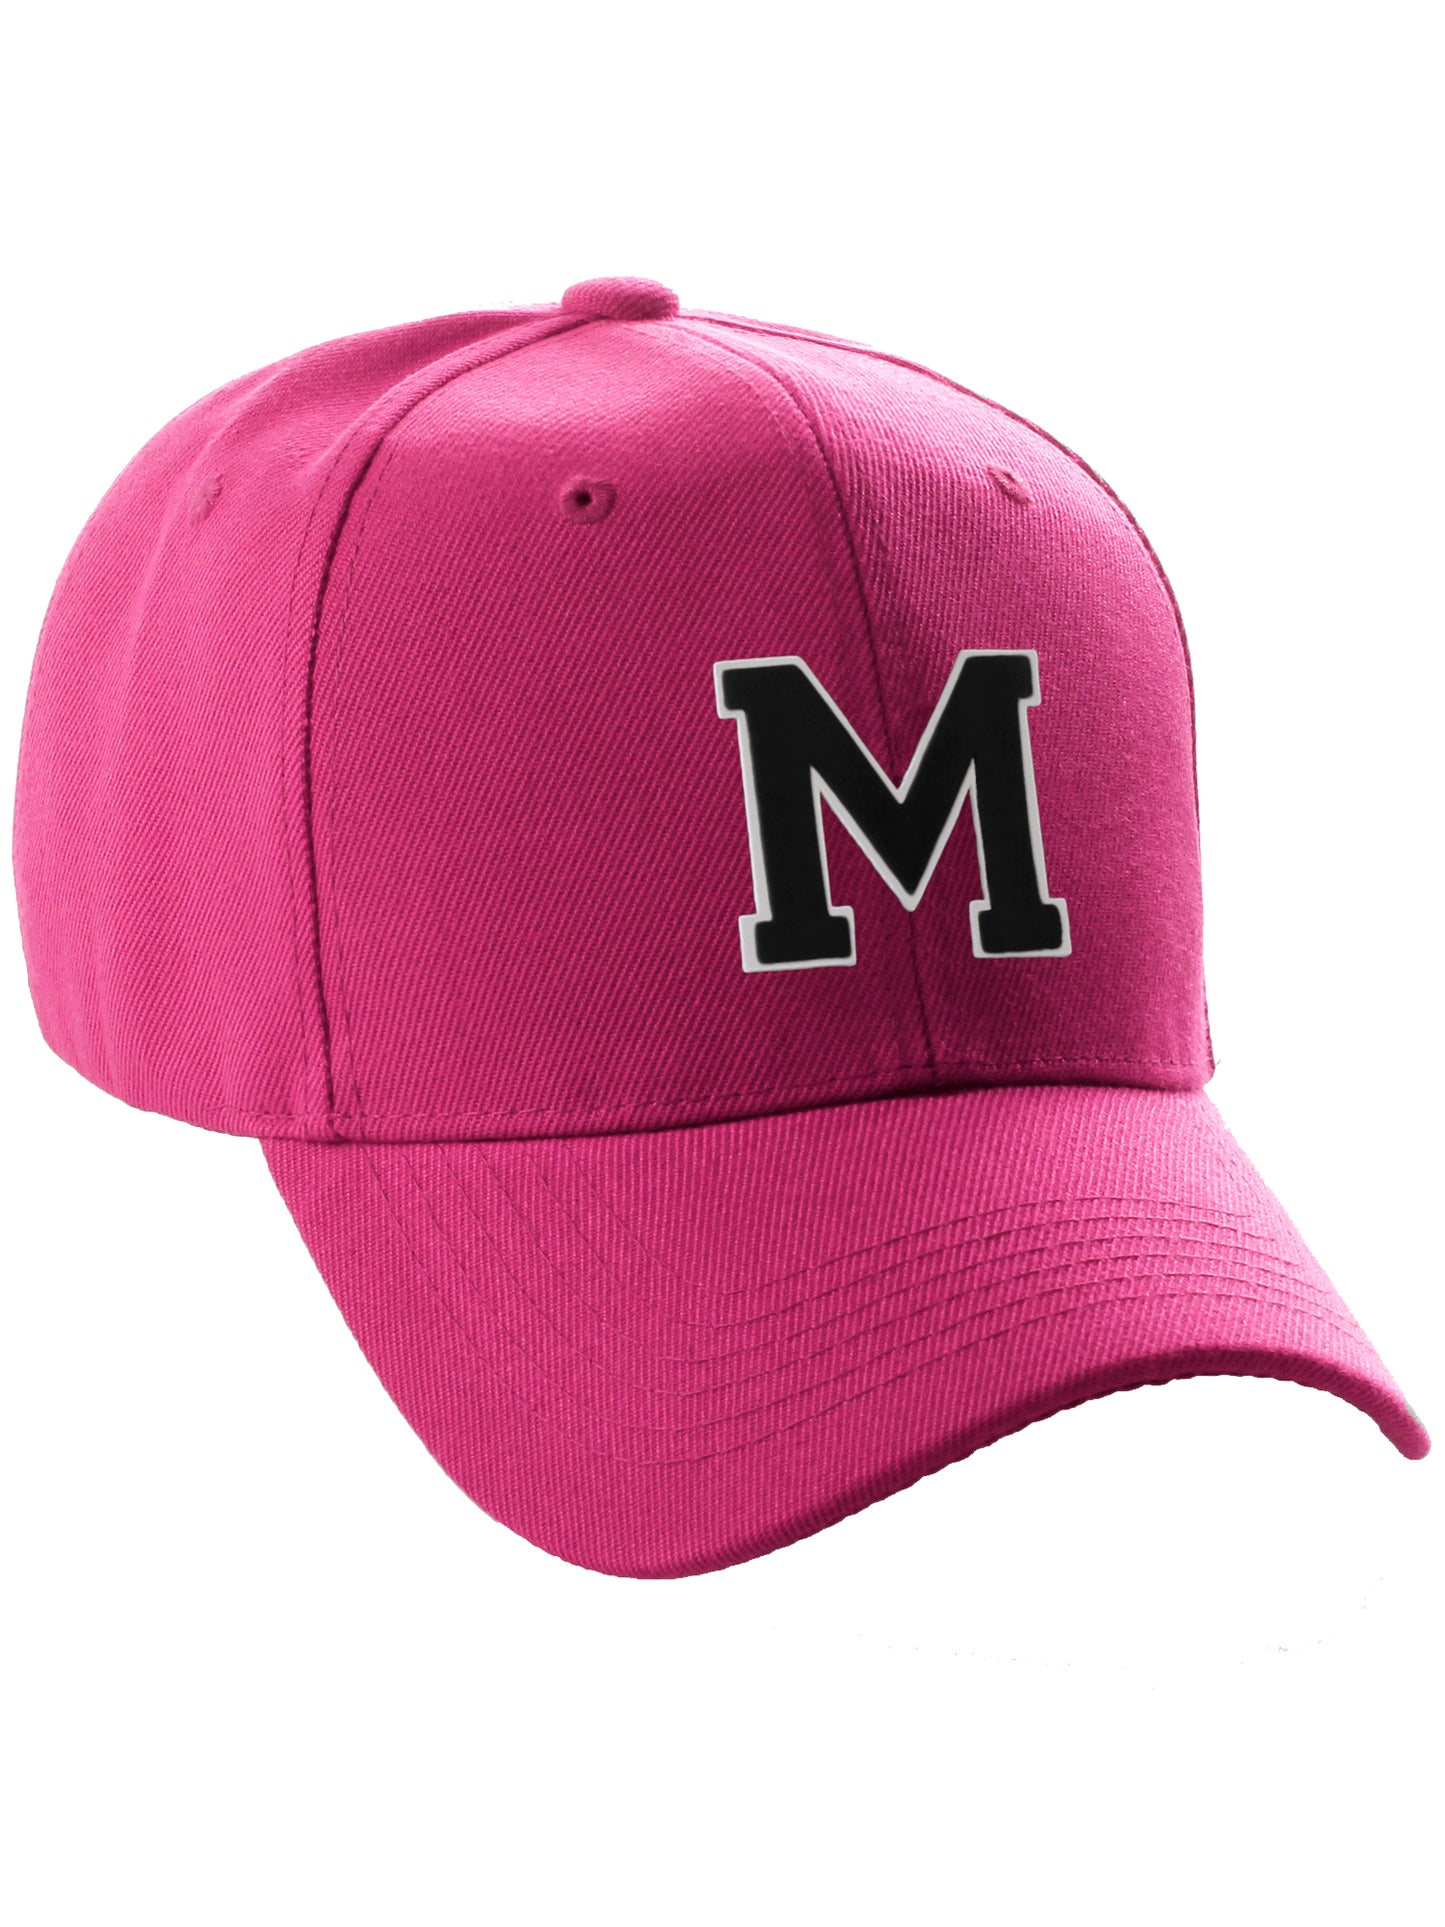 Classic Baseball Hat Custom A to Z Initial Team Letter, Hot Pink Cap White Black